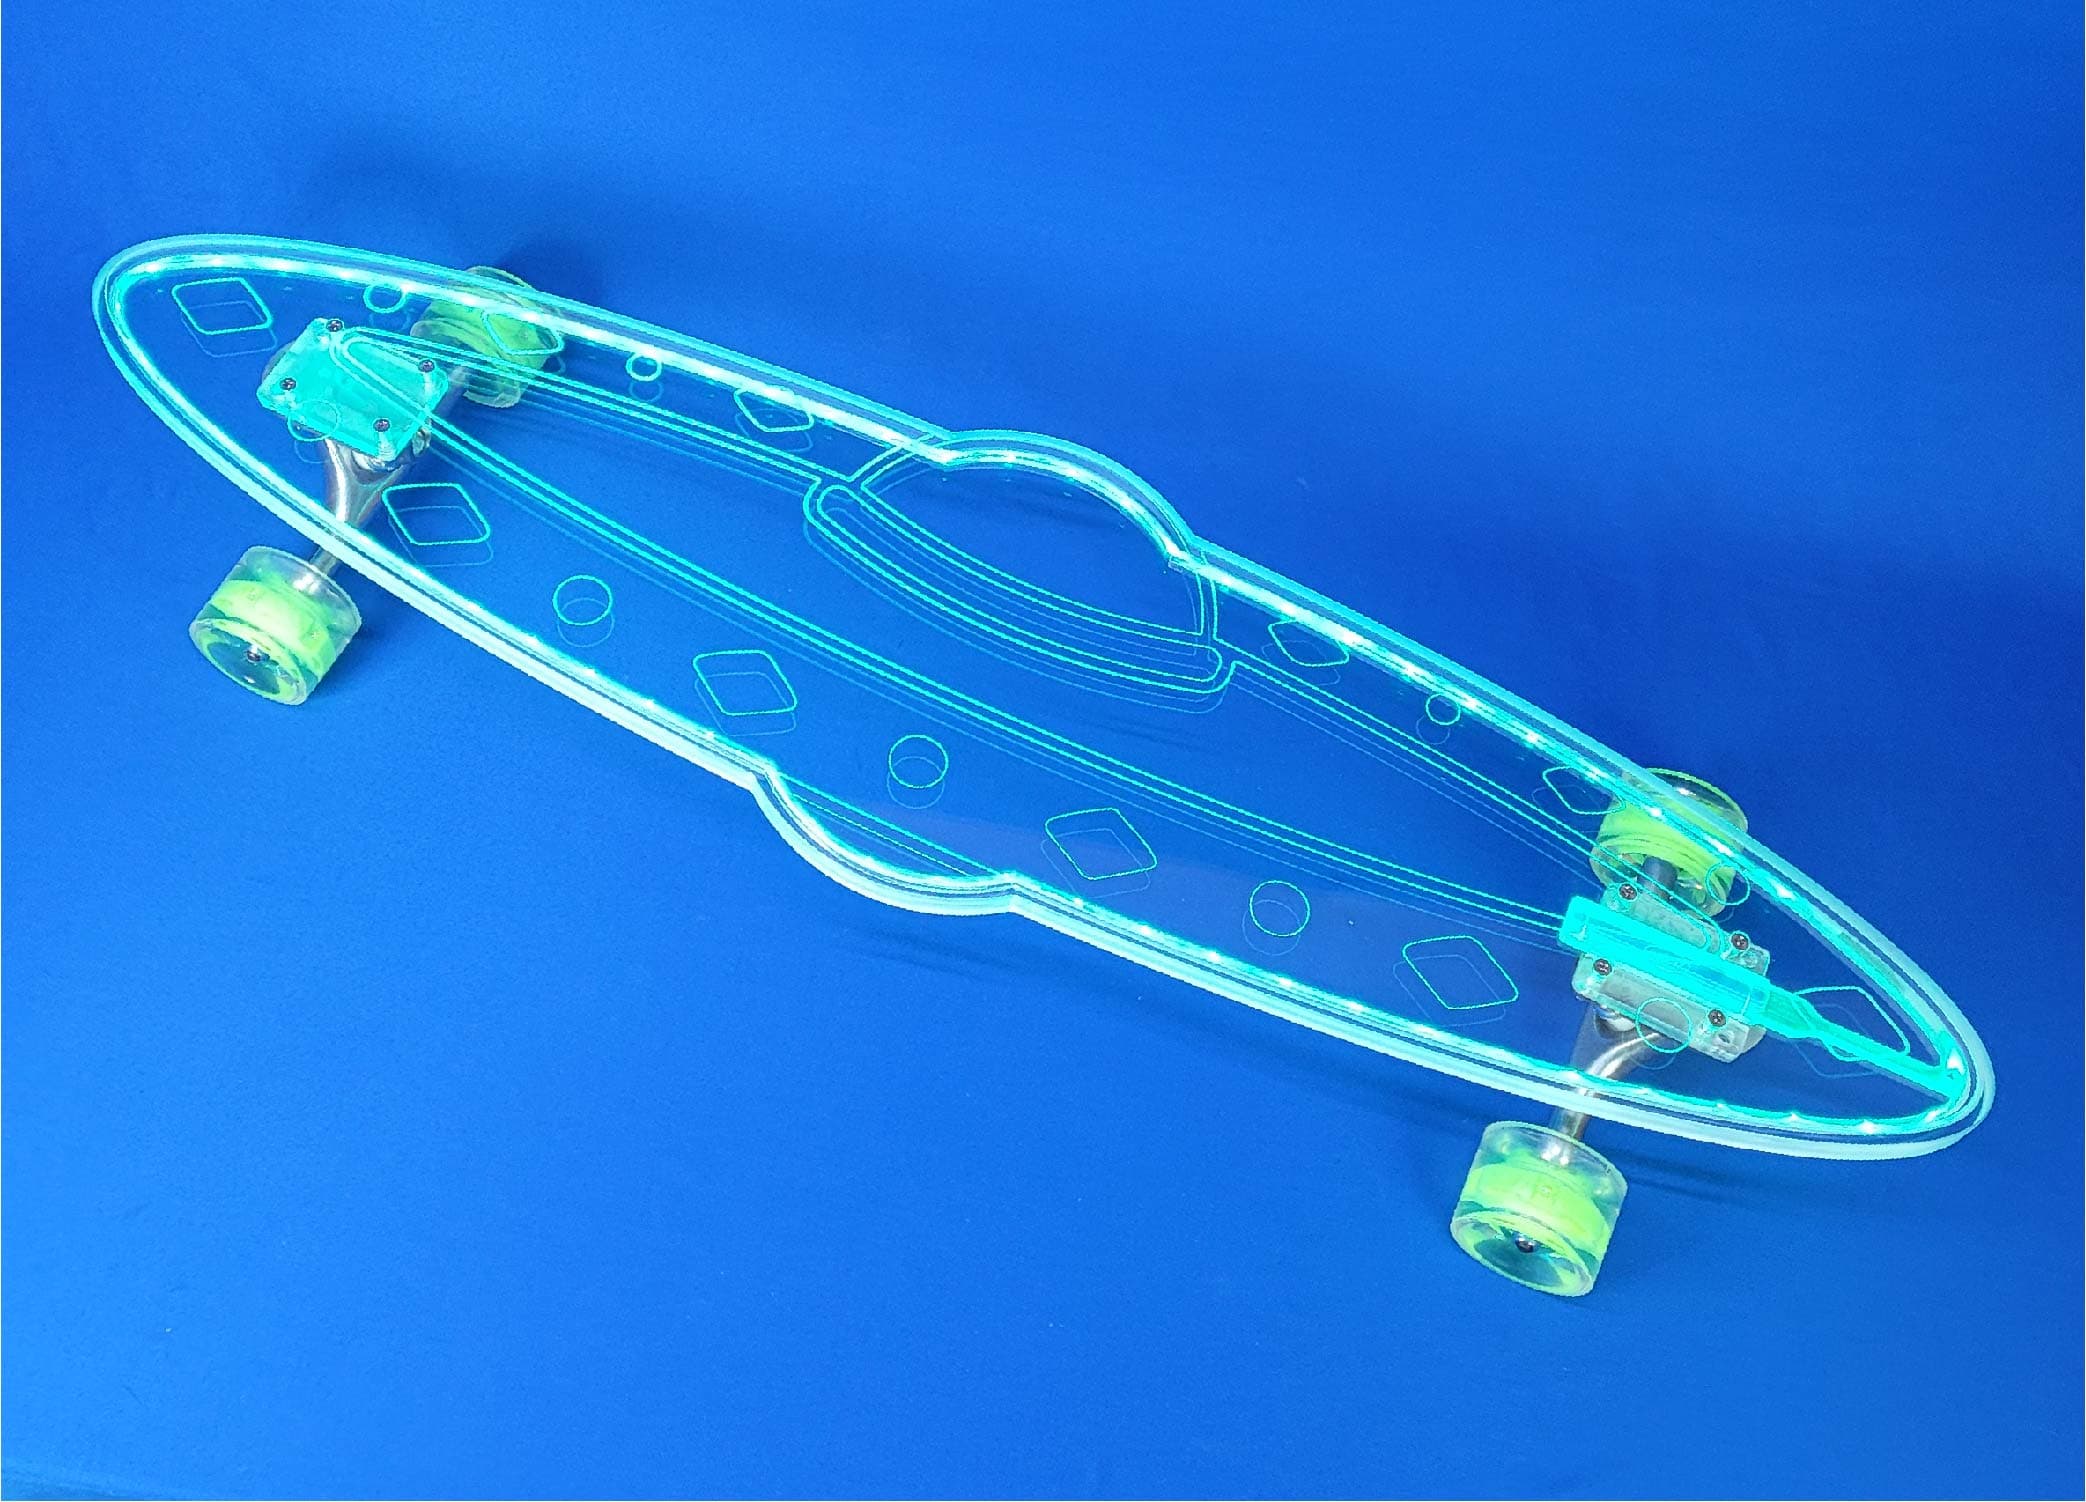 This clear Ufo shaped Longboard has an LED light strip glued inside a channel cut into the bottom of the board to make the longboard glow and the ground underneath it.